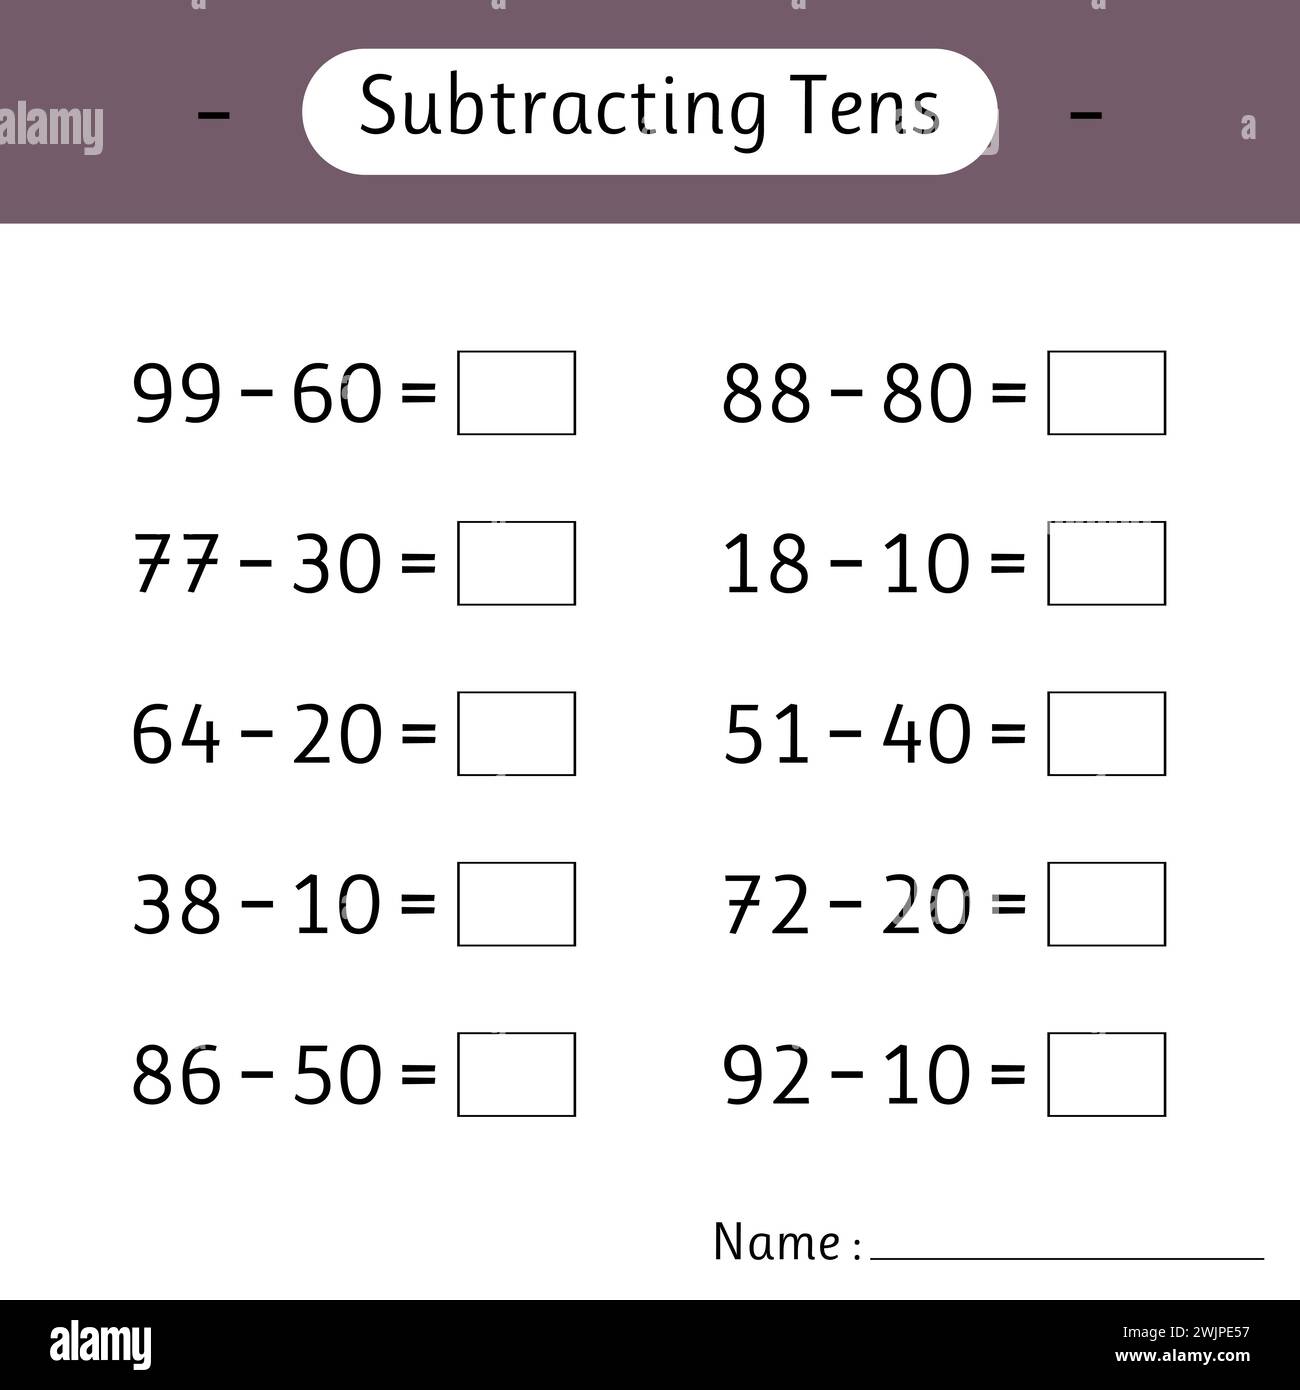 Subtracting Tens. Math worksheets for kids. Mathematics. School education. Development of logical thinking. Vector illustration Stock Vector